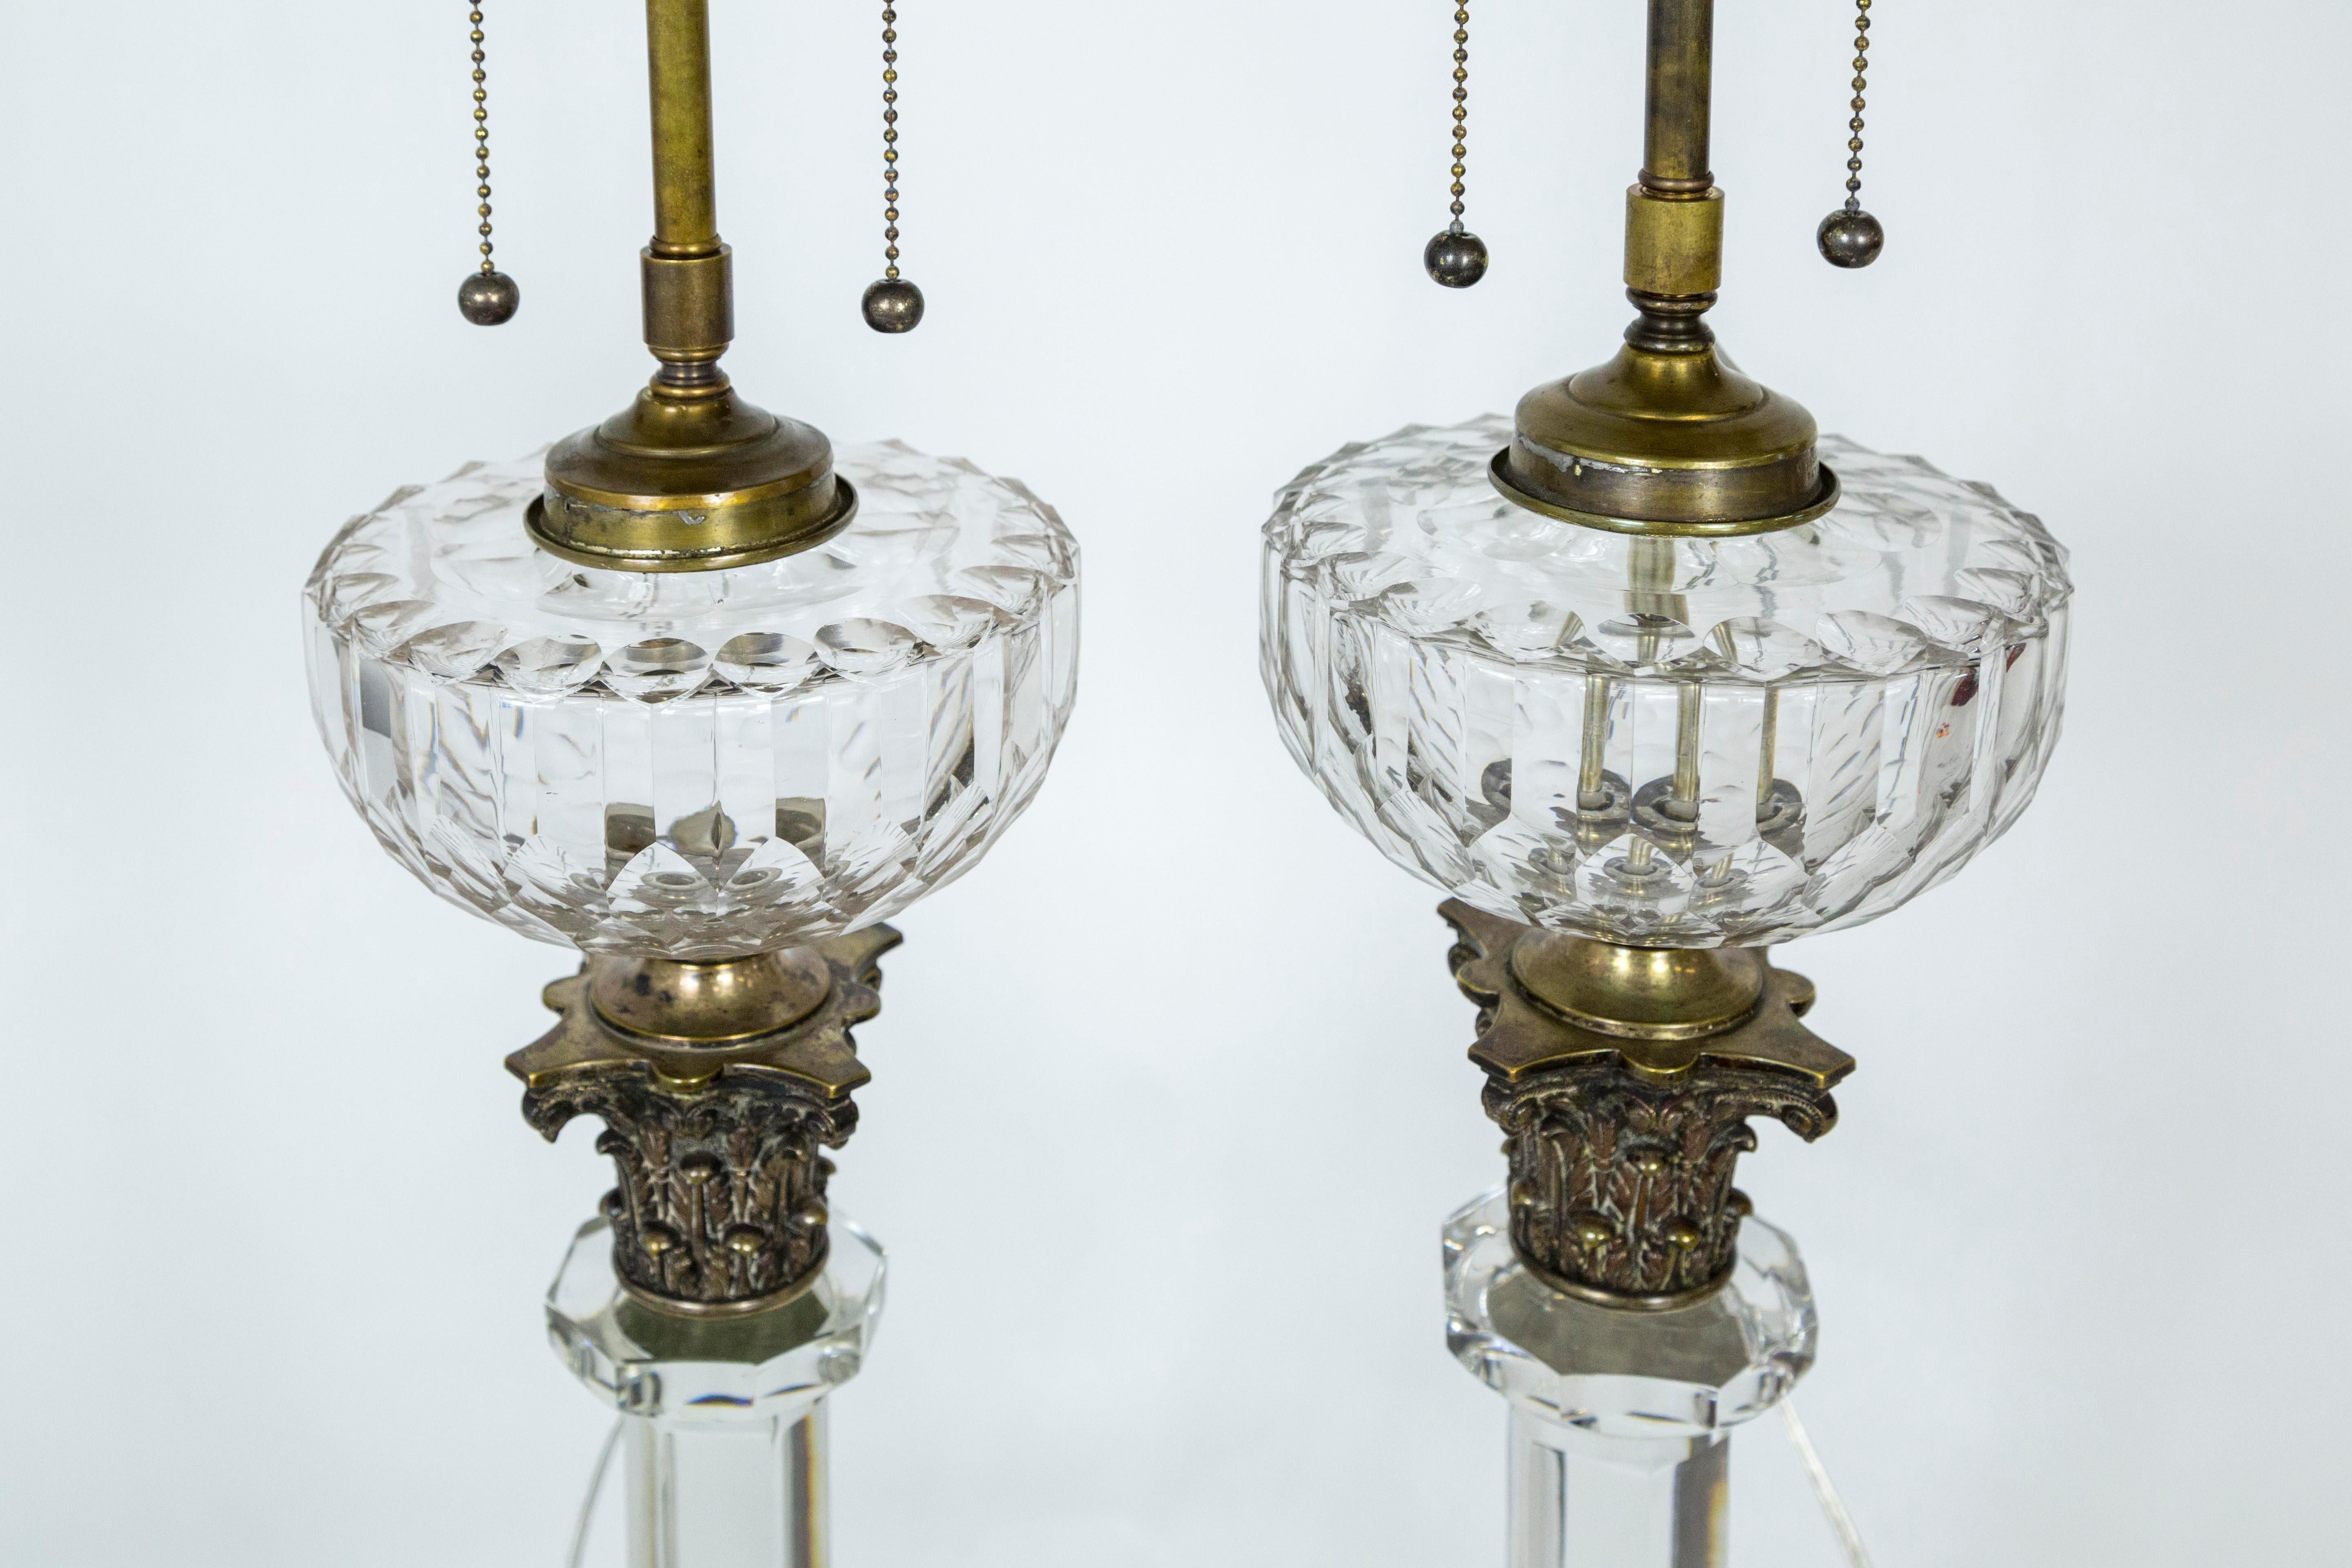 Neoclassical Revival Tall 19th Century Neoclassical Solid Crystal Converted Oil Lamps ‘Pair’